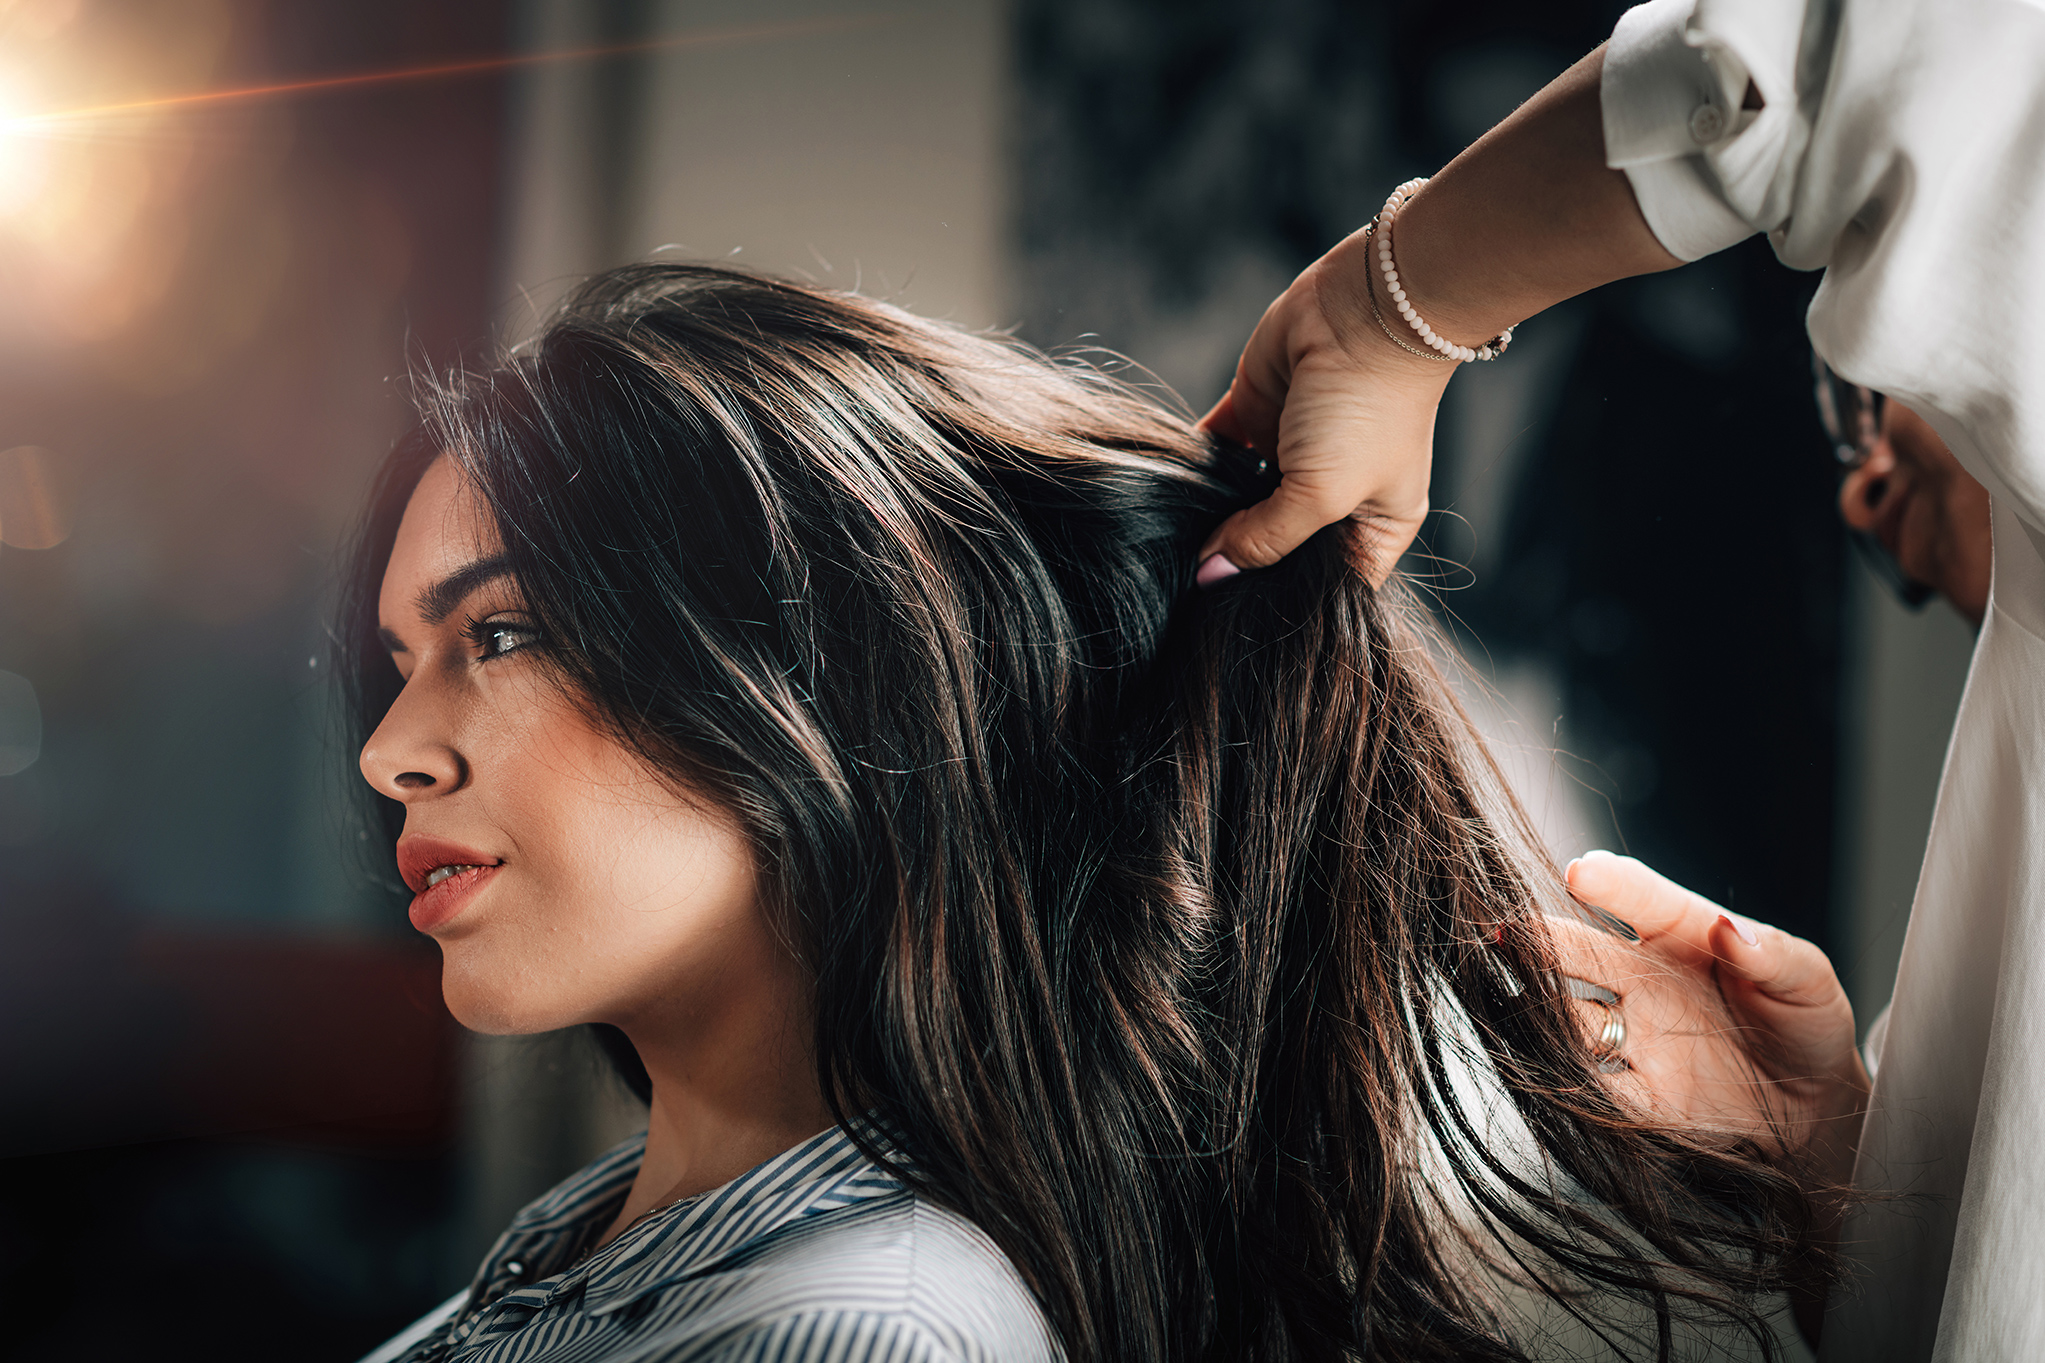 A young and beautiful woman getting a new hairstyle with the skilled hands of a stylist